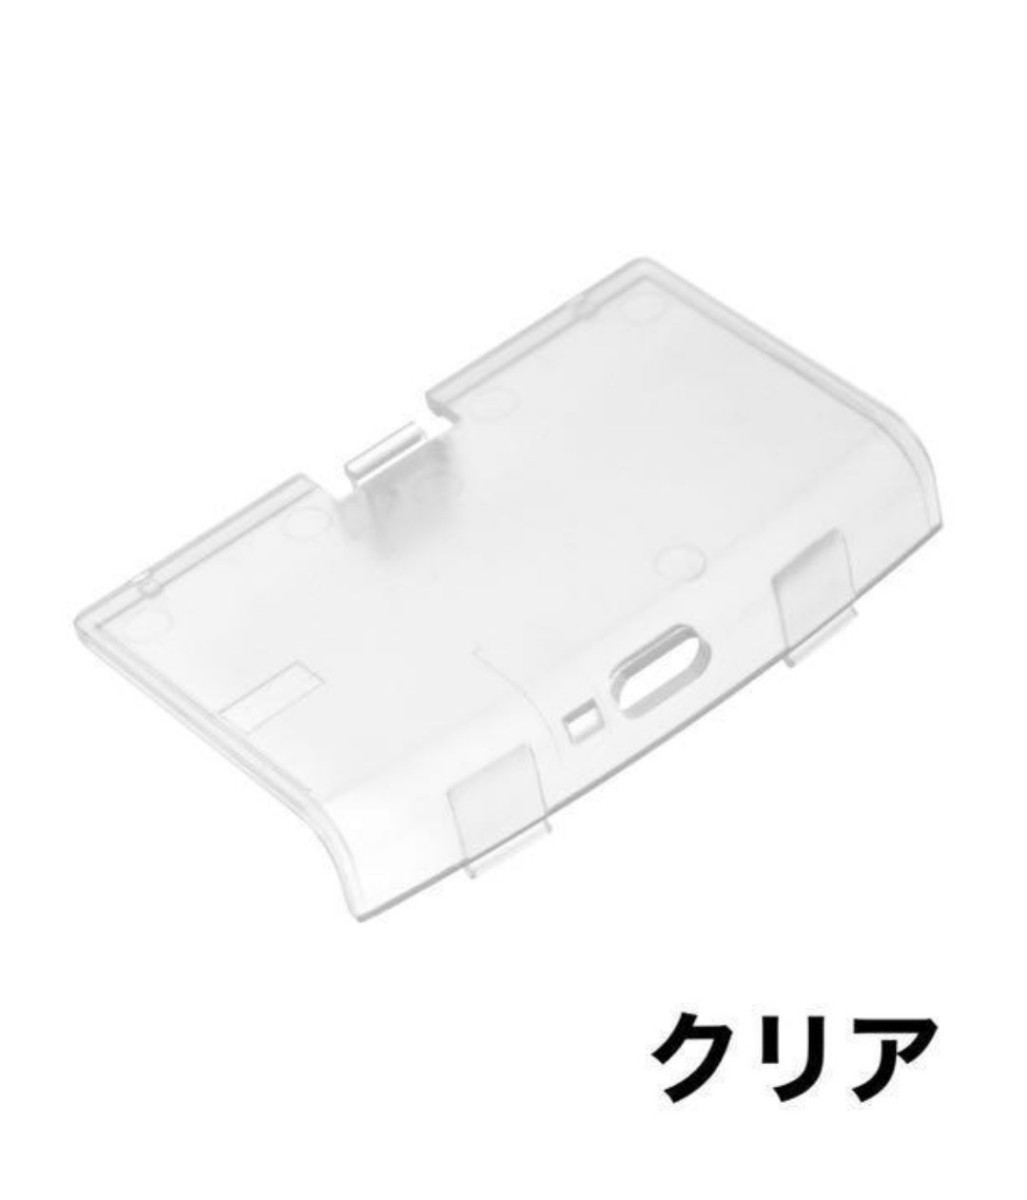 Clean Juice GBA バッテリーパック専用カバー クリア